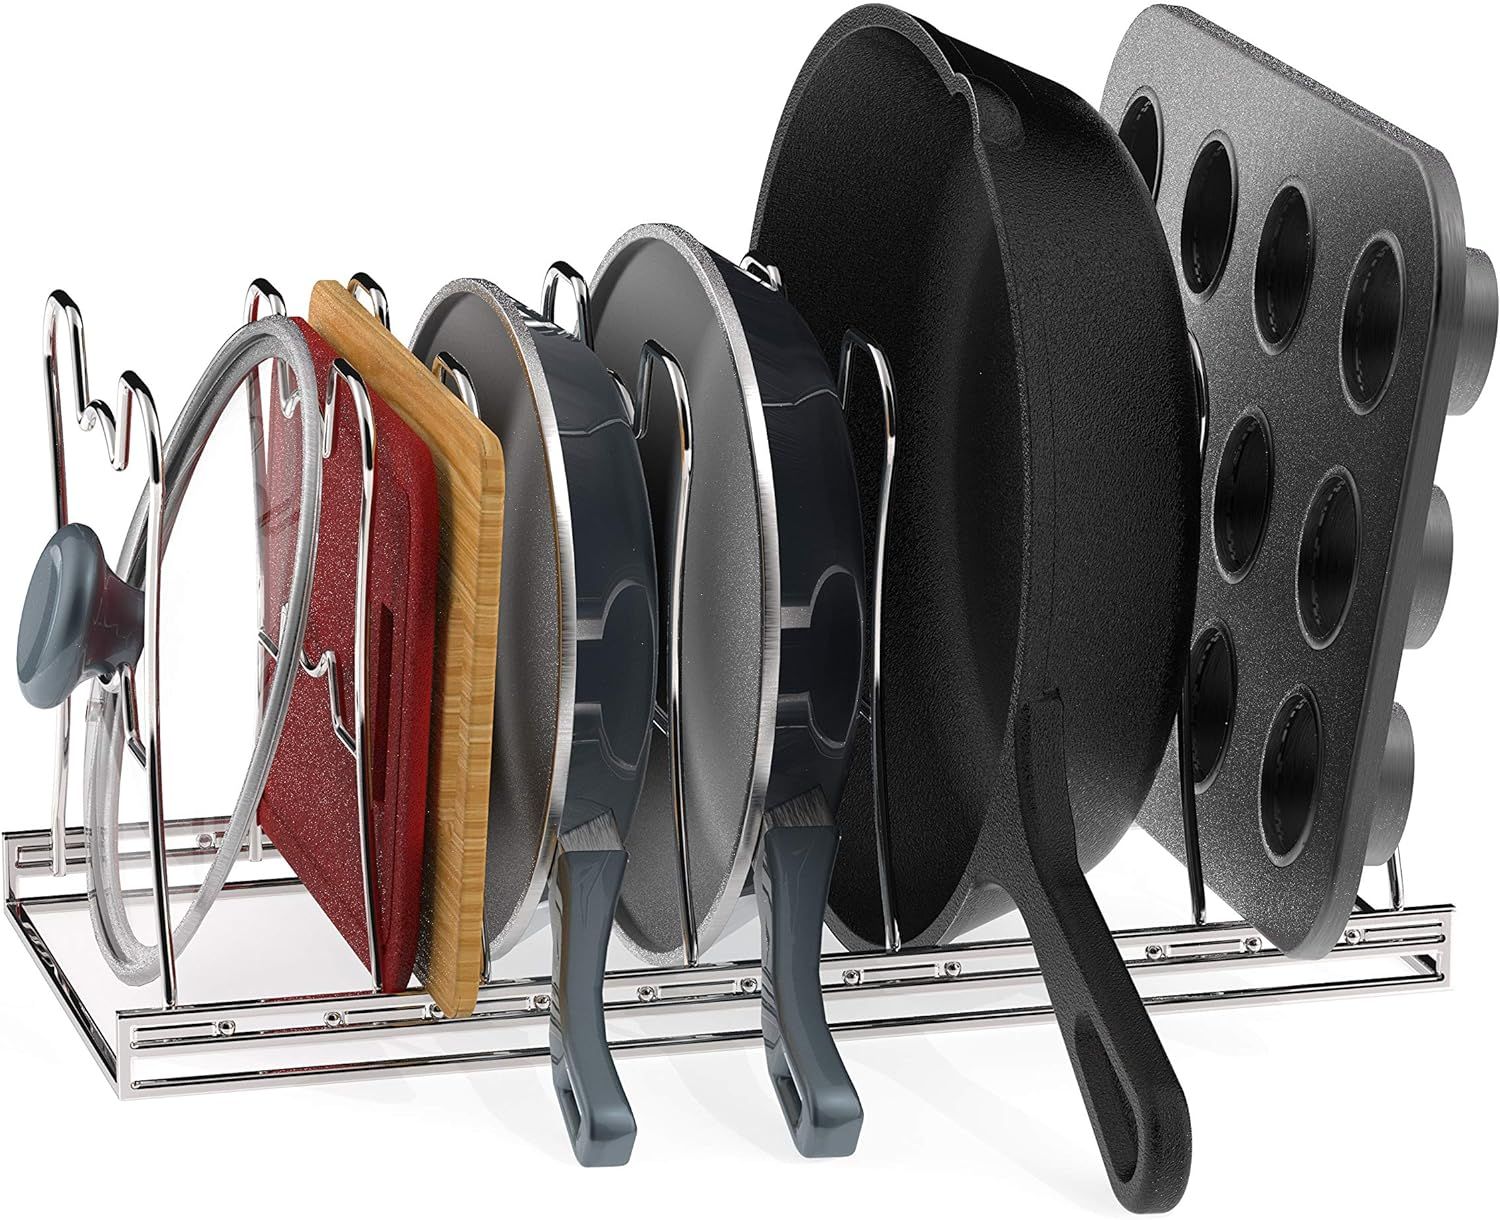 Simple Houseware 7 Adjustable Compartments Pot and Pan Organizer Rack Lid Holder, Chrome | Amazon (US)